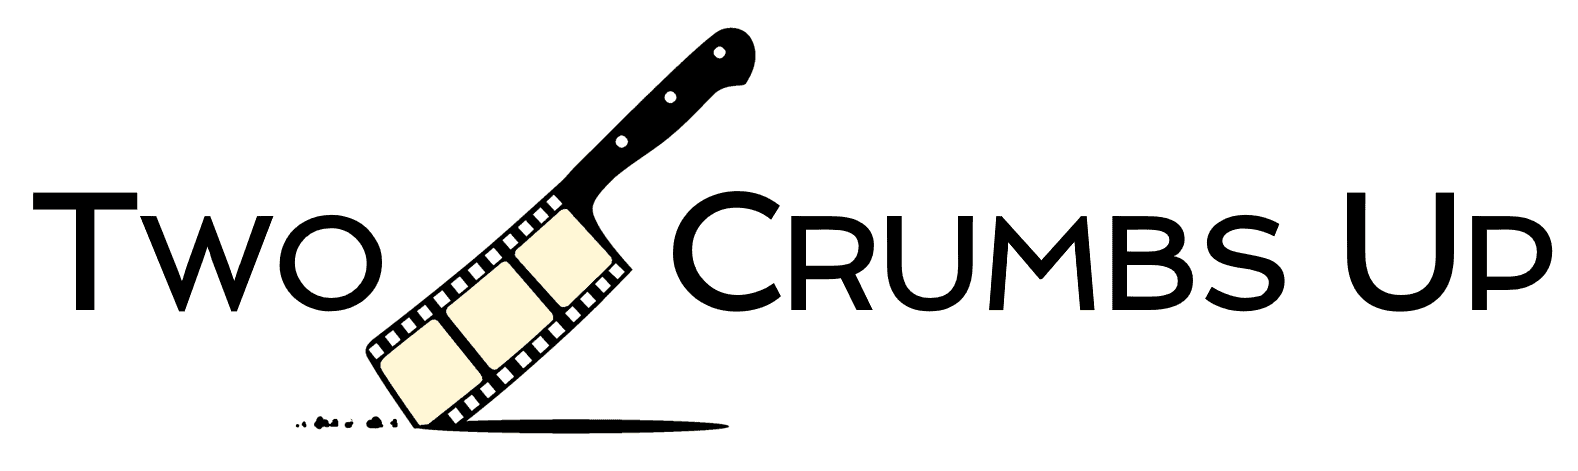 two crumbs up logo